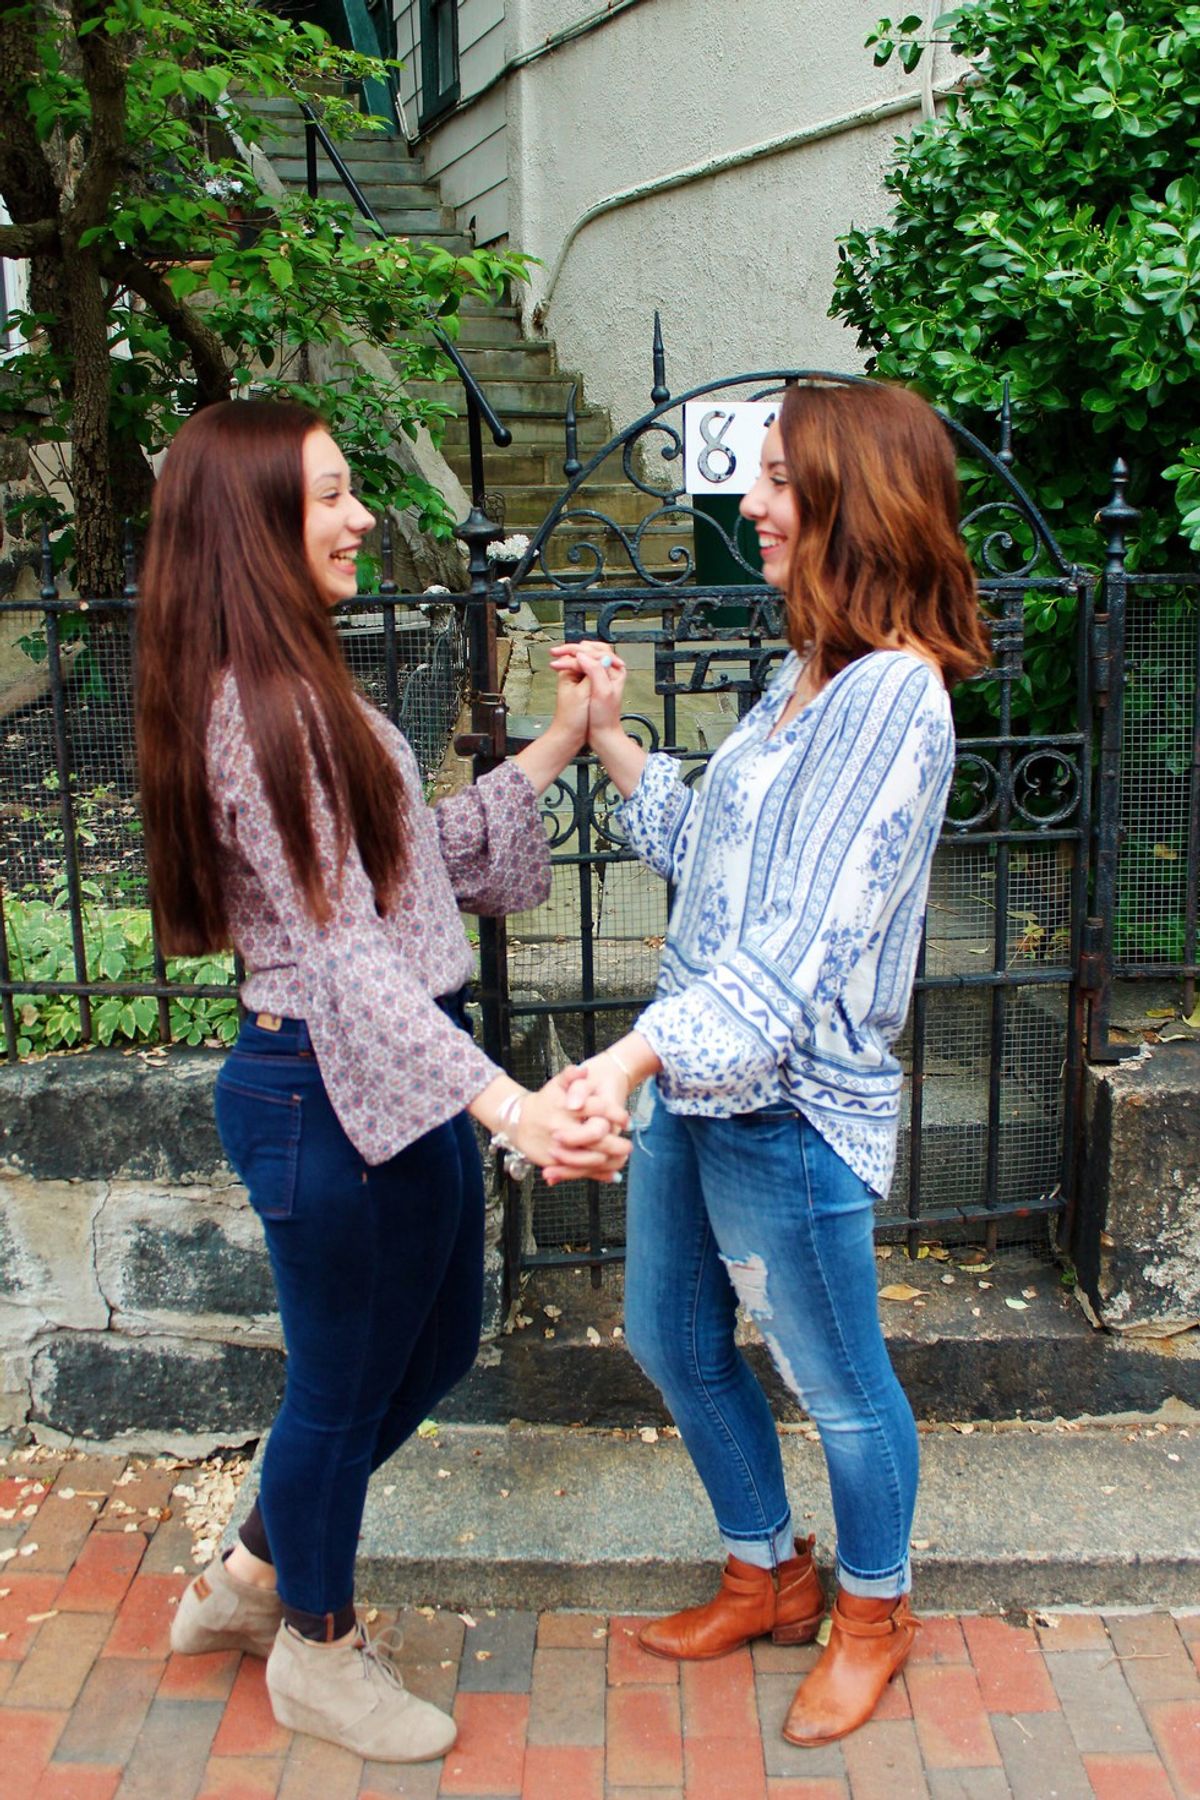 An Open Letter To The Best Friend I'm Leaving For College